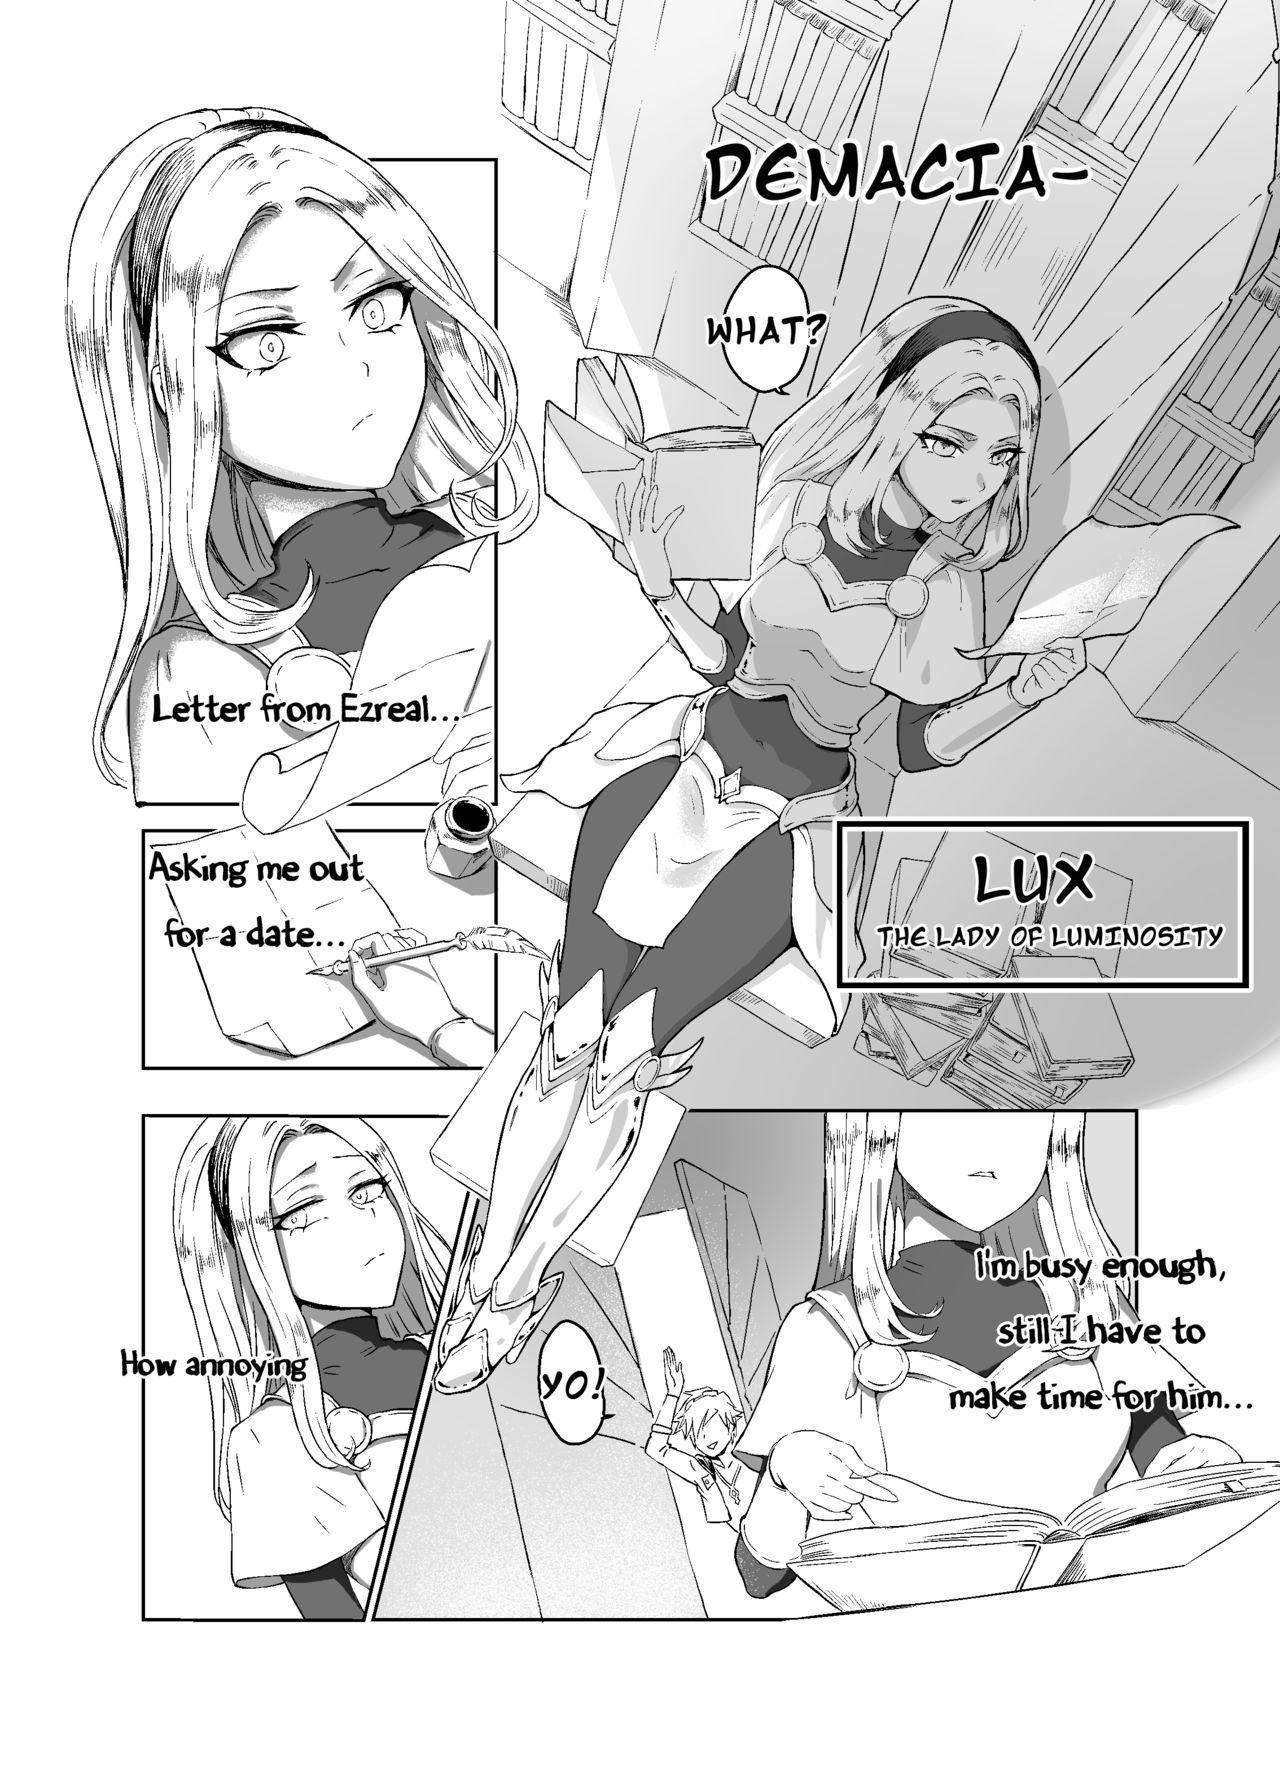 Hard Porn Lux x Viego ft. Ezreal - League of legends Goldenshower - Page 2